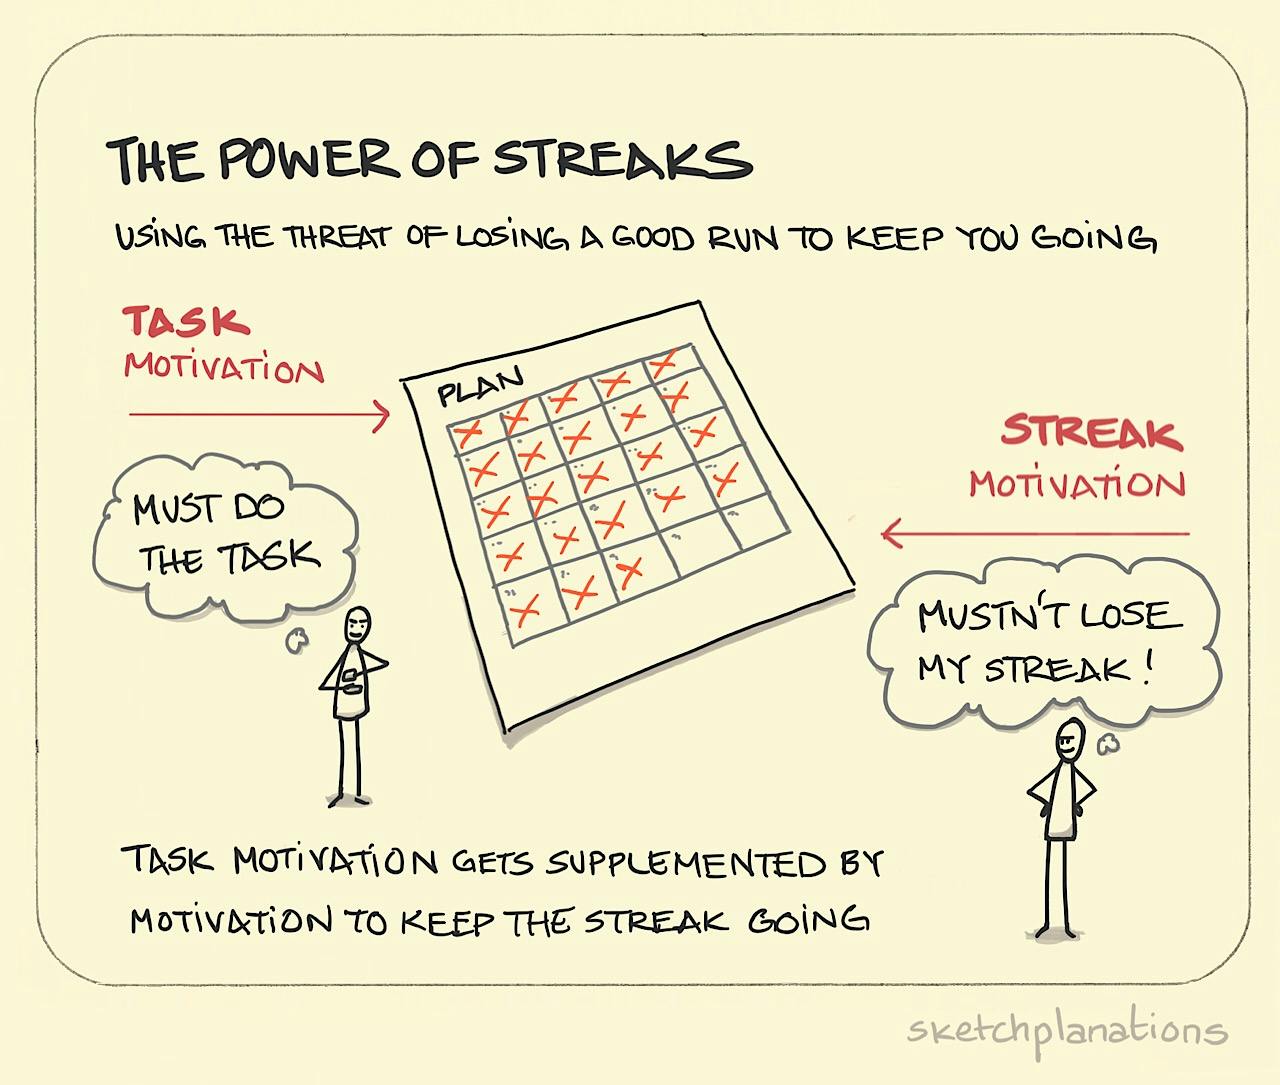 The power of streaks illustration: a task schedule is shown as a daily grid where all but the final 2 squares have been completed. 